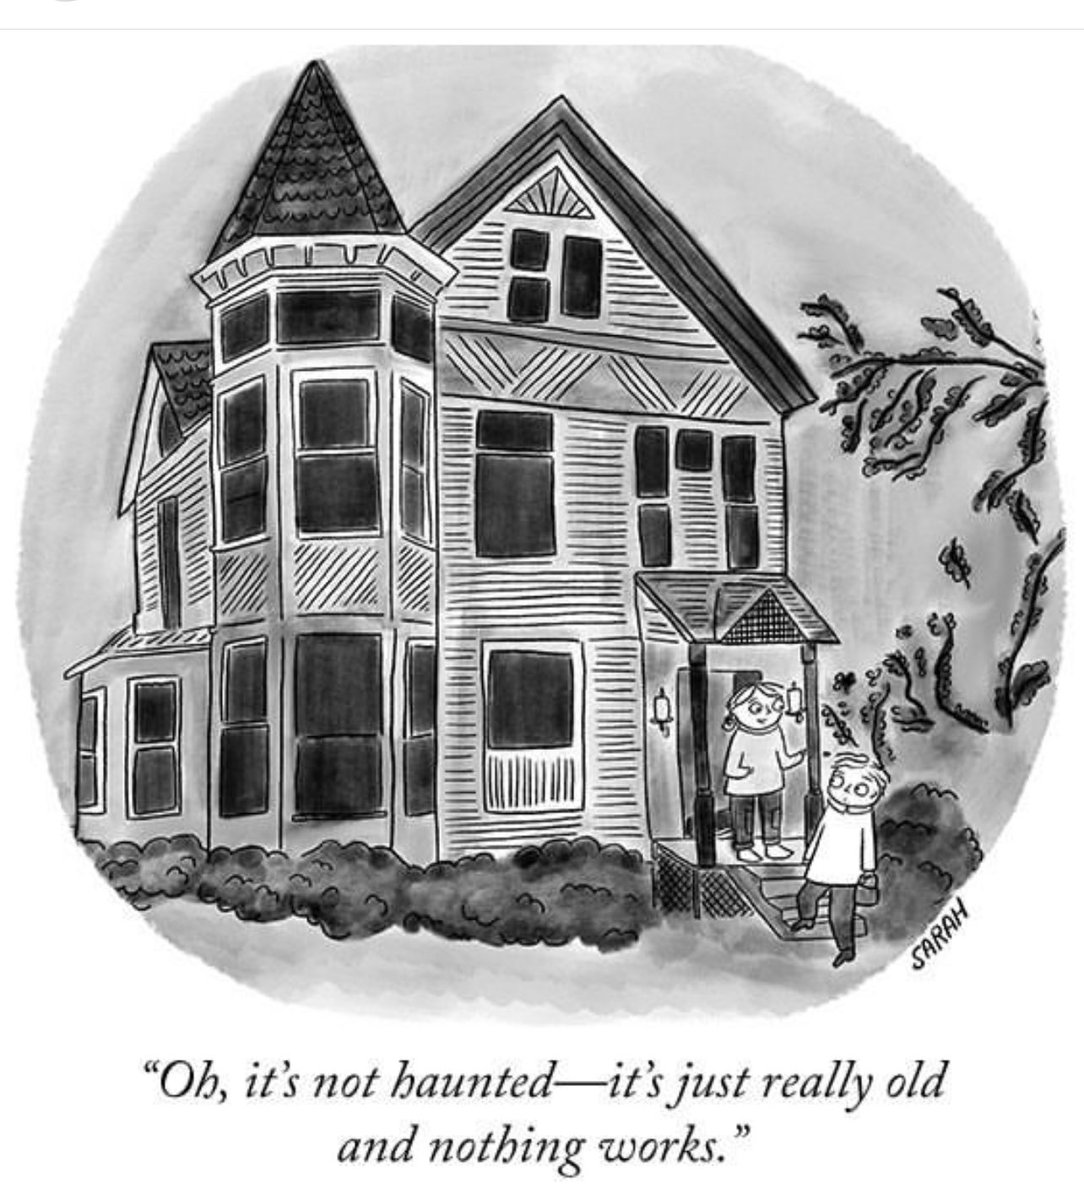 #5thgrade artists! A little cartoon from the @NewYorker especially for you on Halloween! From what period is this house? What design details prove that?! @PDSD_Pennell @CoebournES @MrsCarlin202 @MrsMcDougall200 @MrsBlaisse @MrsFrei1 @MsSnyders_Class